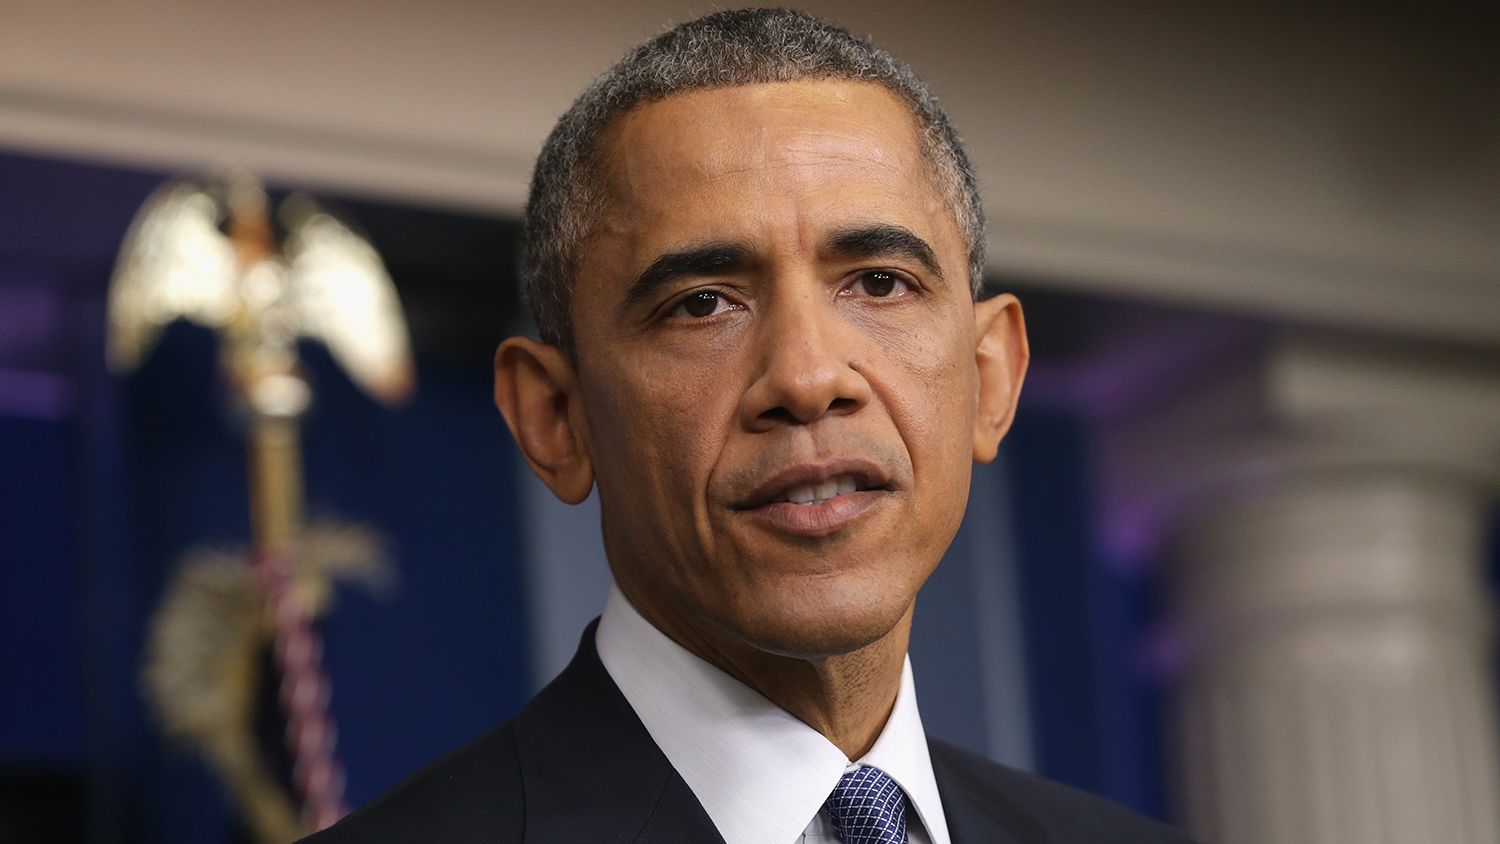 U.S. President Barack Obama speaks to members of the media during his last news conference of the year in the James Brady Press Briefing Room of the White House December 19, 2014 in Washington, DC.
